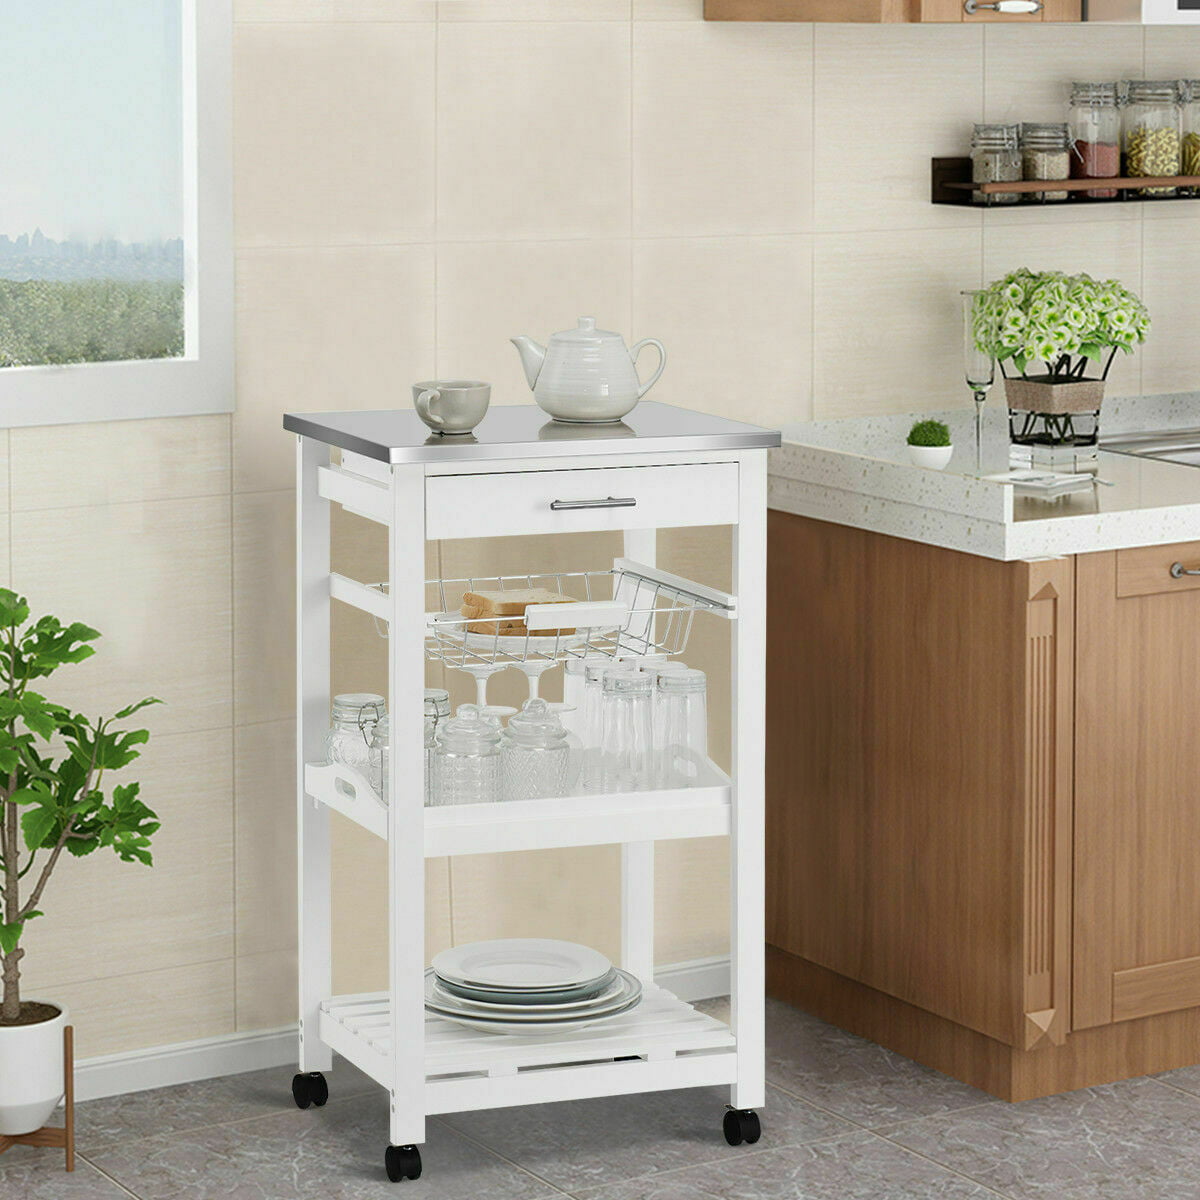 Costway Rolling Kitchen Trolley Cart Steel White Top Removable Tray W/Storage Basket andDrawers